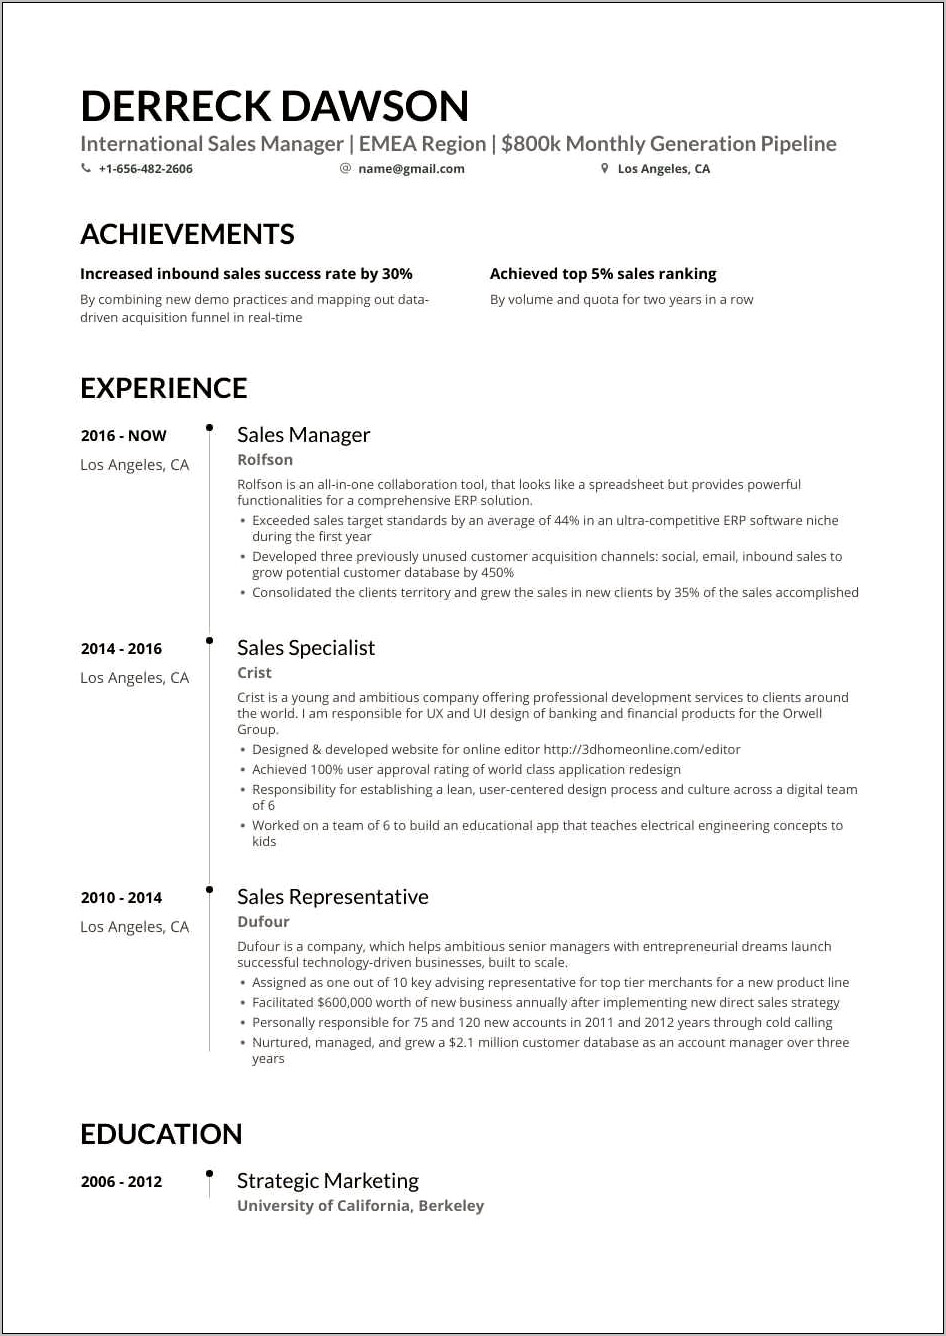 Inside Sales Manager Resume Examples